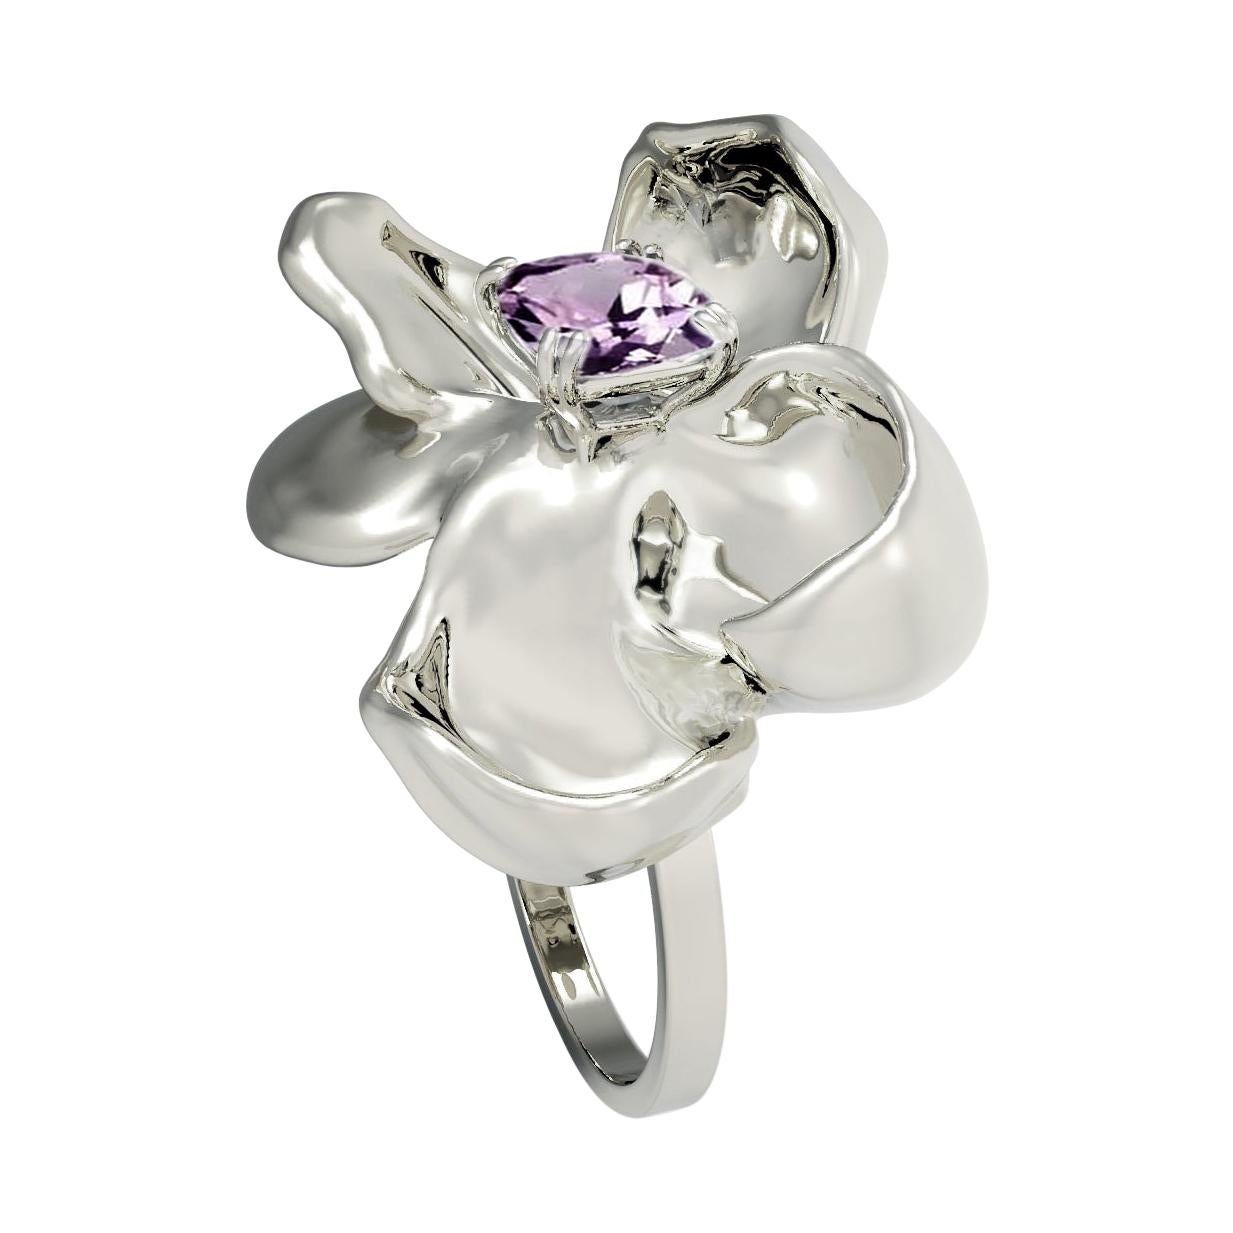 18 Karat White Gold Contemporary Cocktail Ring with Berry Spinel by Artist For Sale